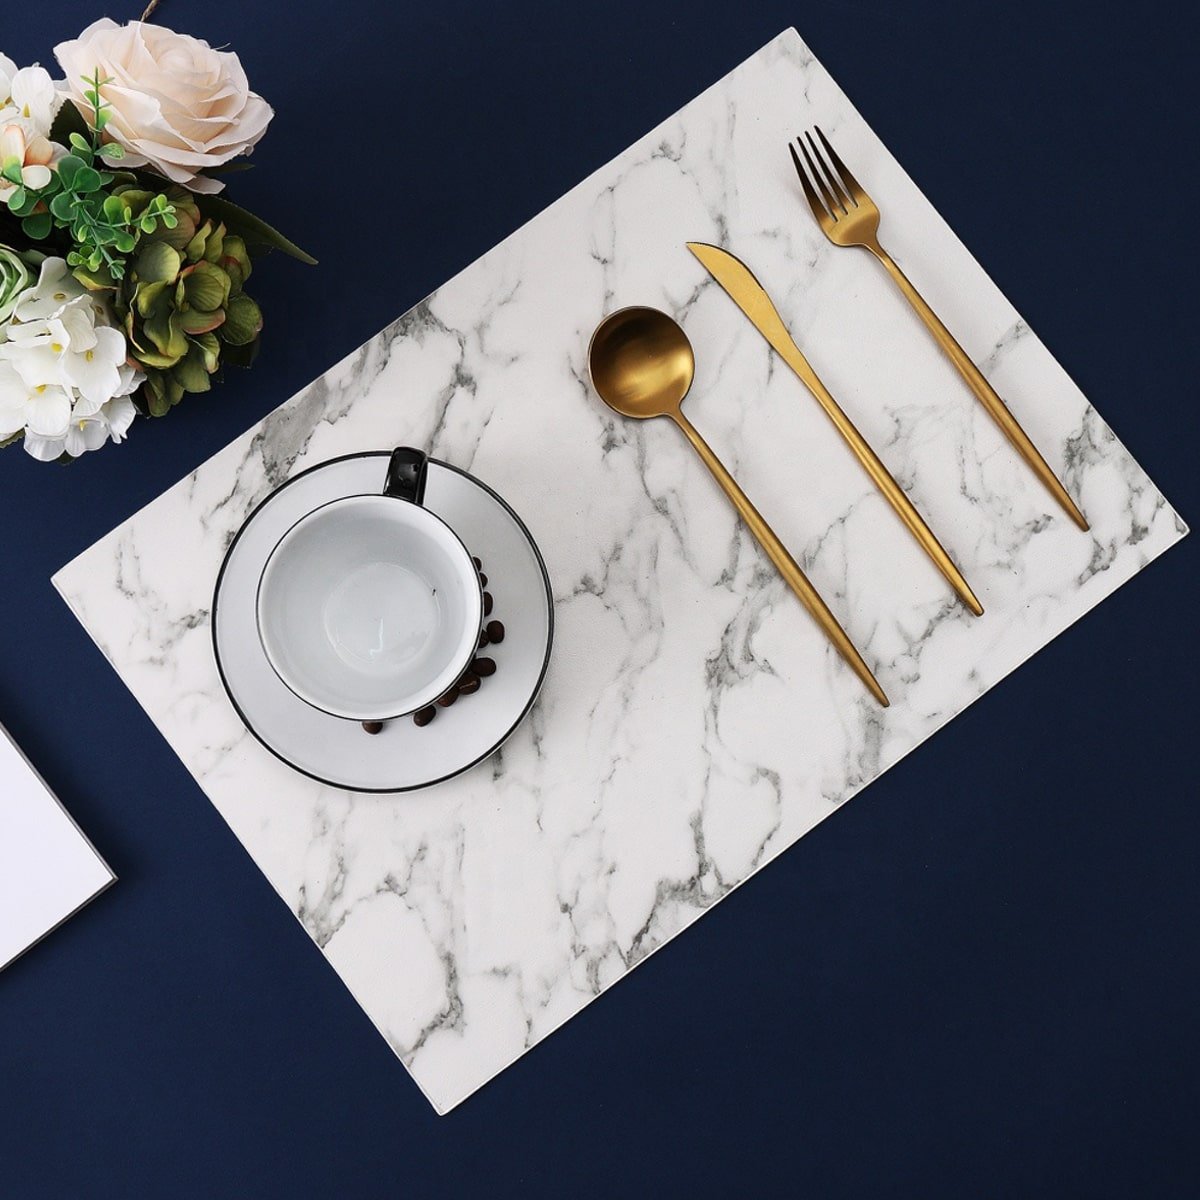 Carrara Placemat - Buy Placemats Online at FRANKY'S